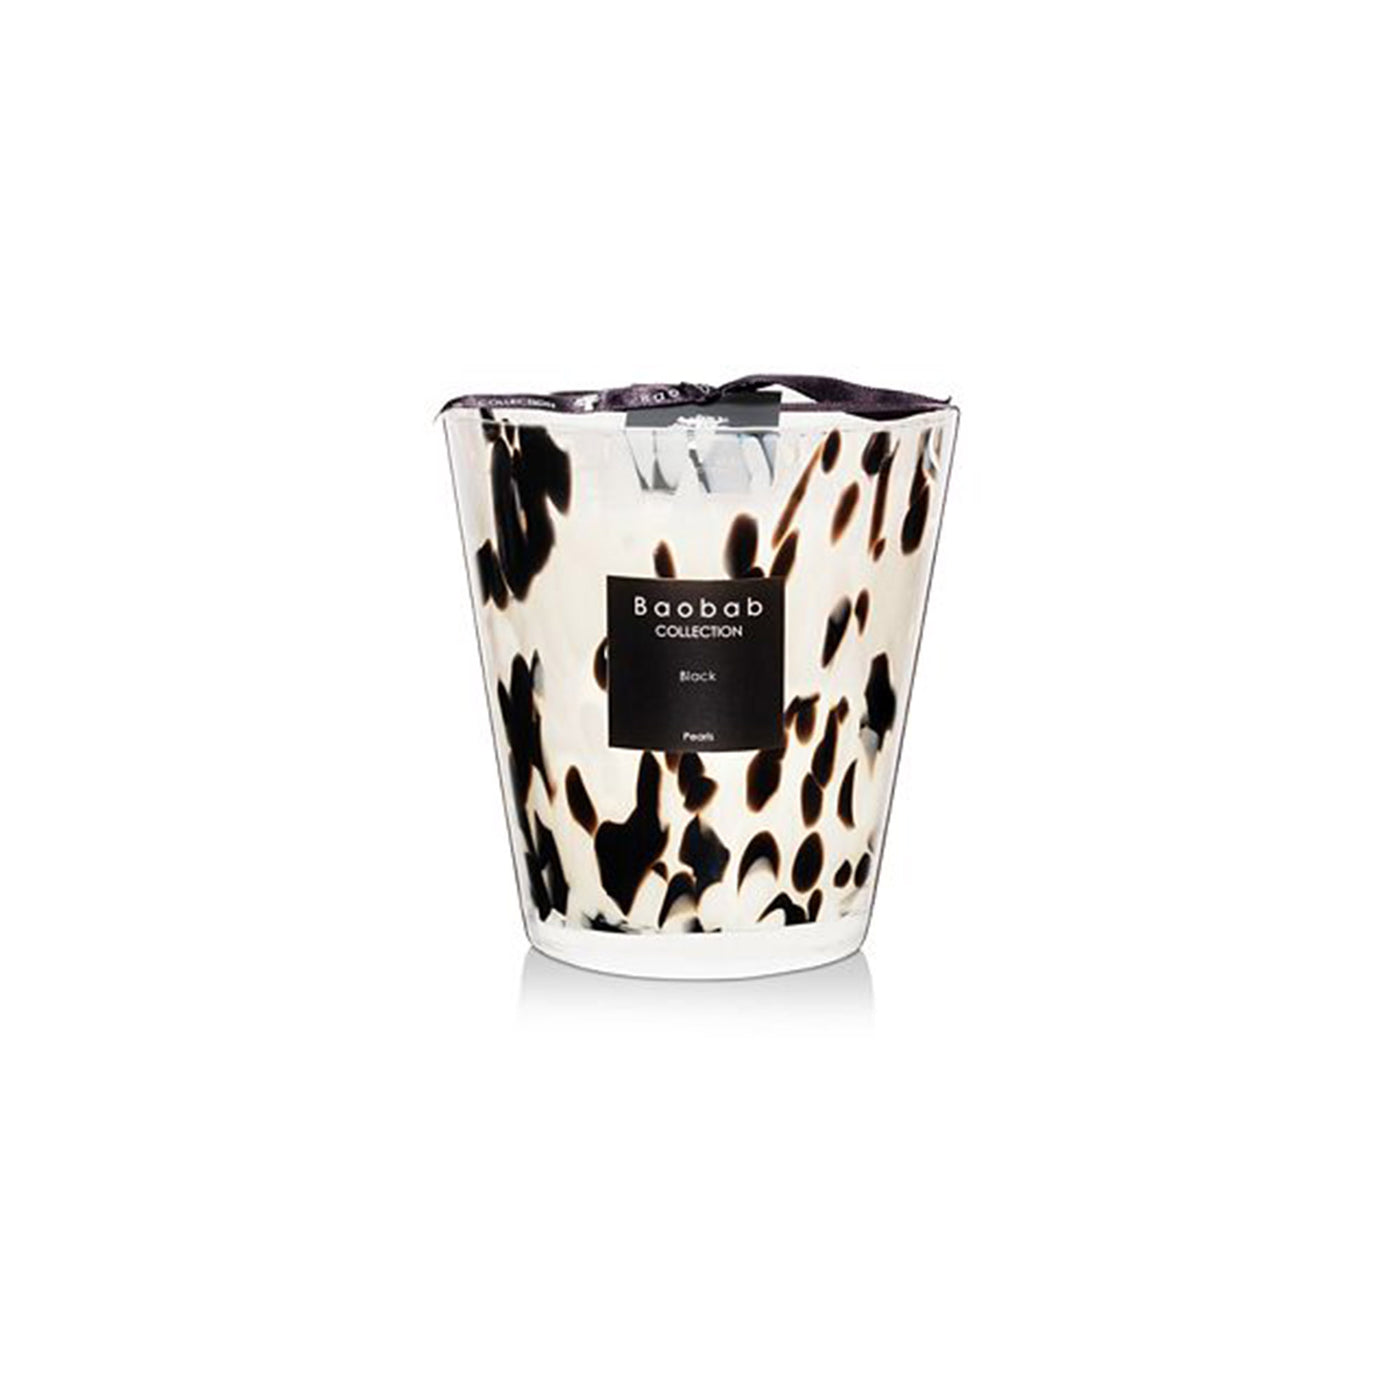 Black Pearls Scented Candles , Baobab Collection, Candles + Diffusers- Julia Moss Designs